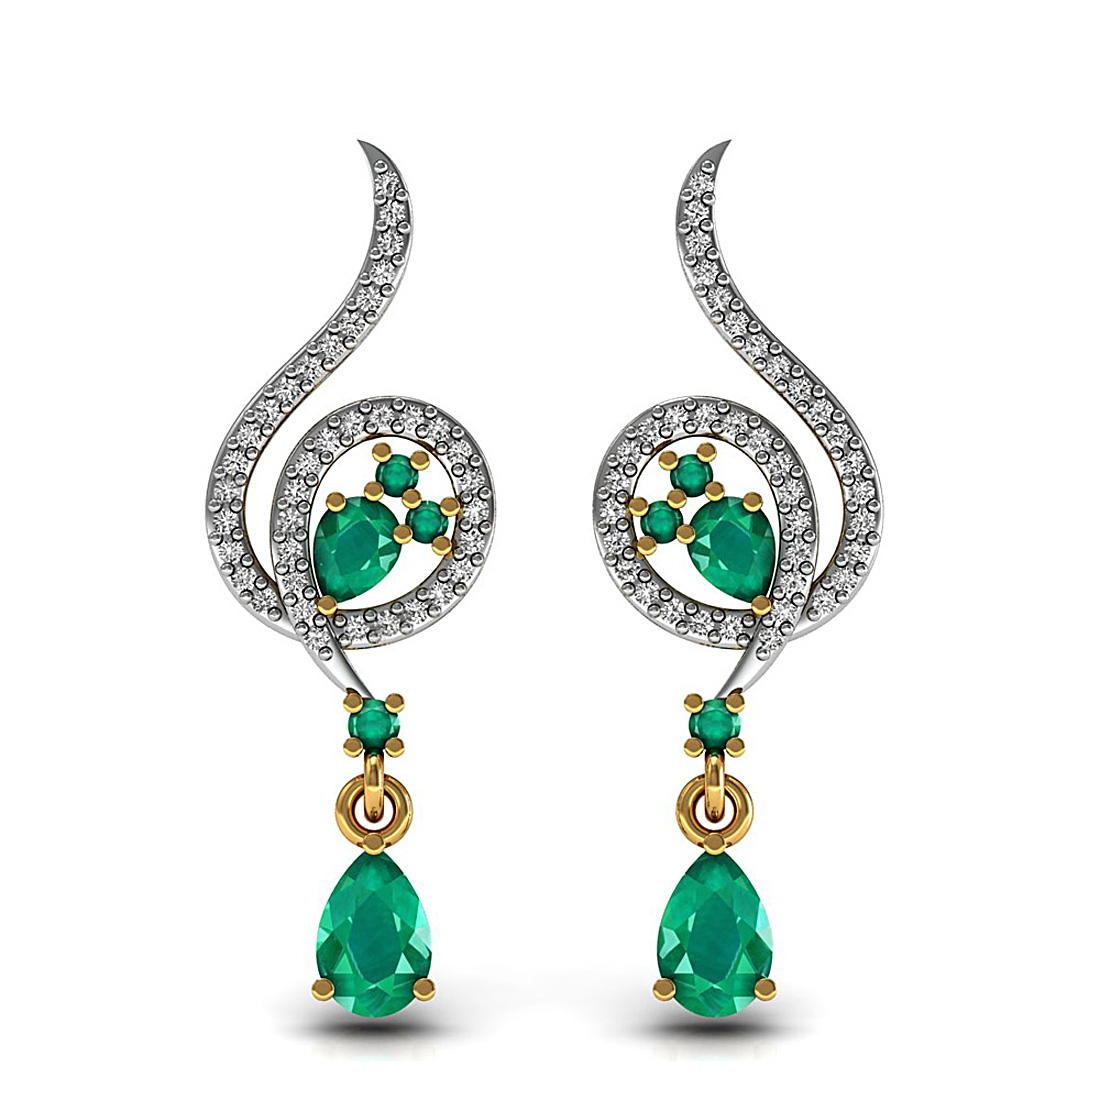 This beautiful pair of drop earrings made in 18k solid yellow gold and studded with natural emerald gemstone.